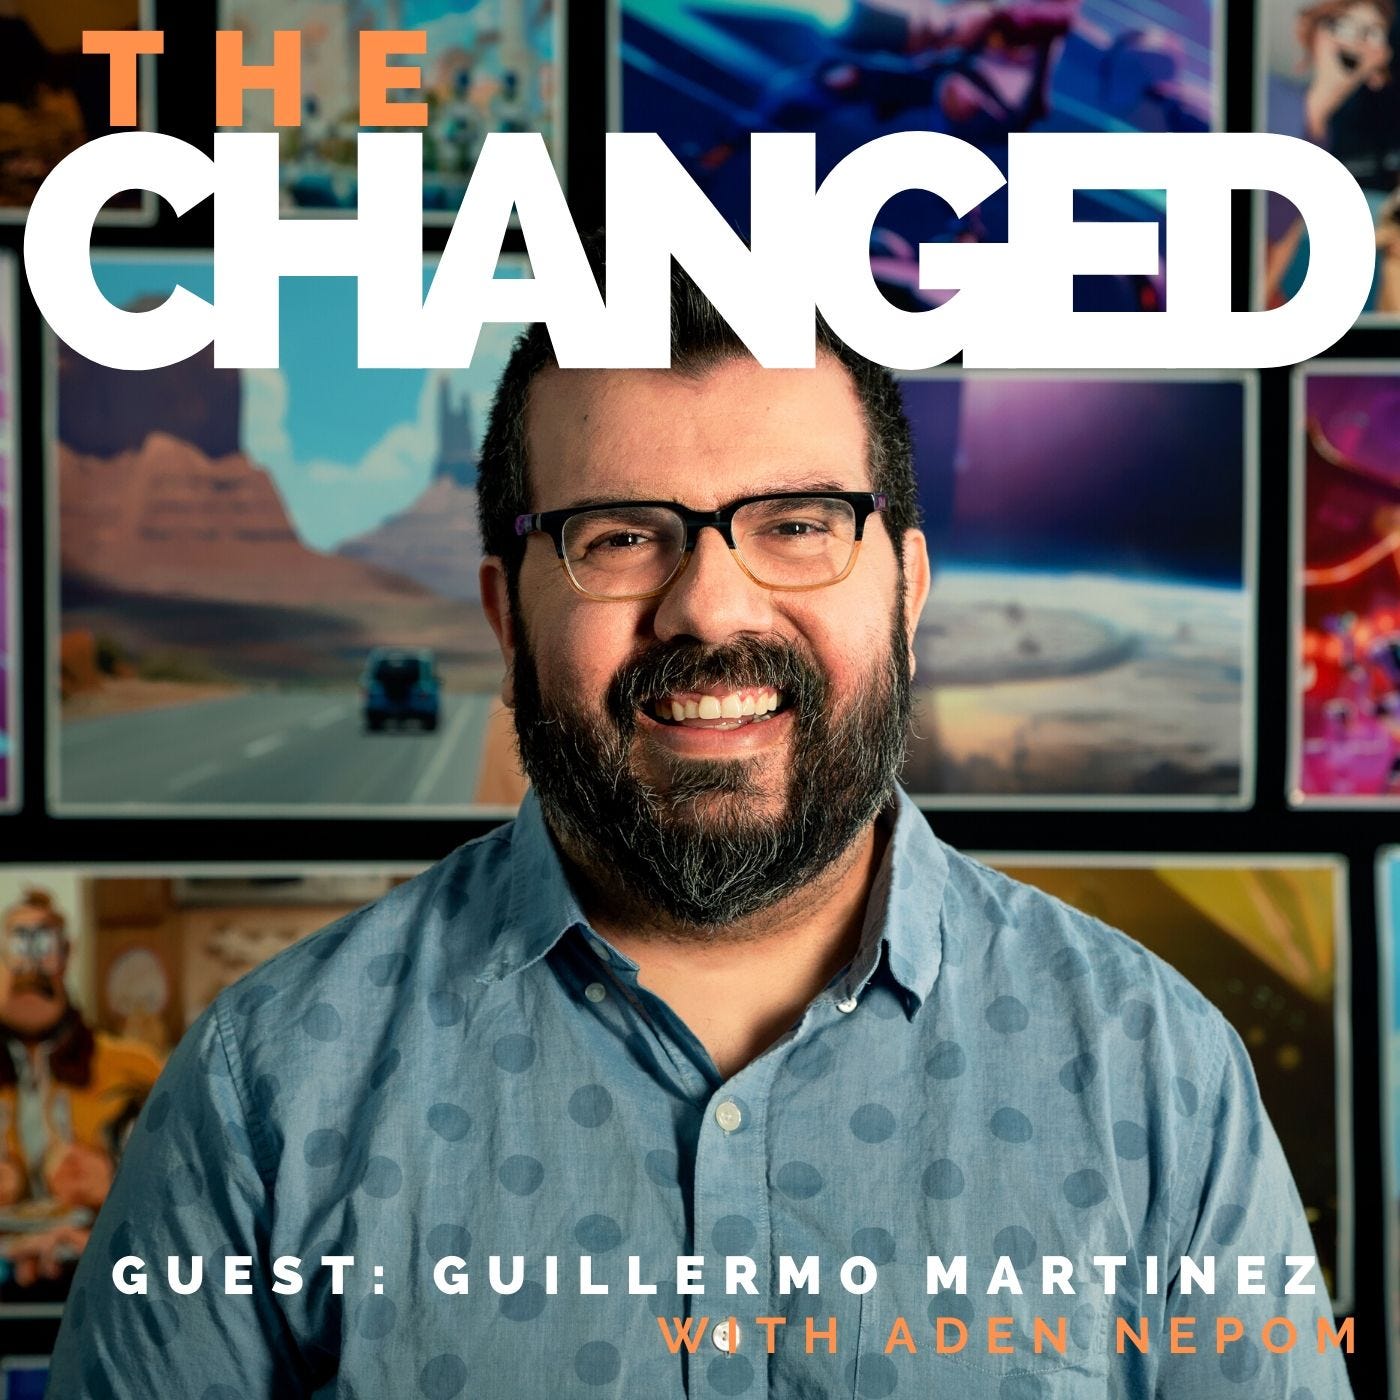 Writer, Animator and Head of Story at Sony Motion Pictures Animation, Guillermo Martinez